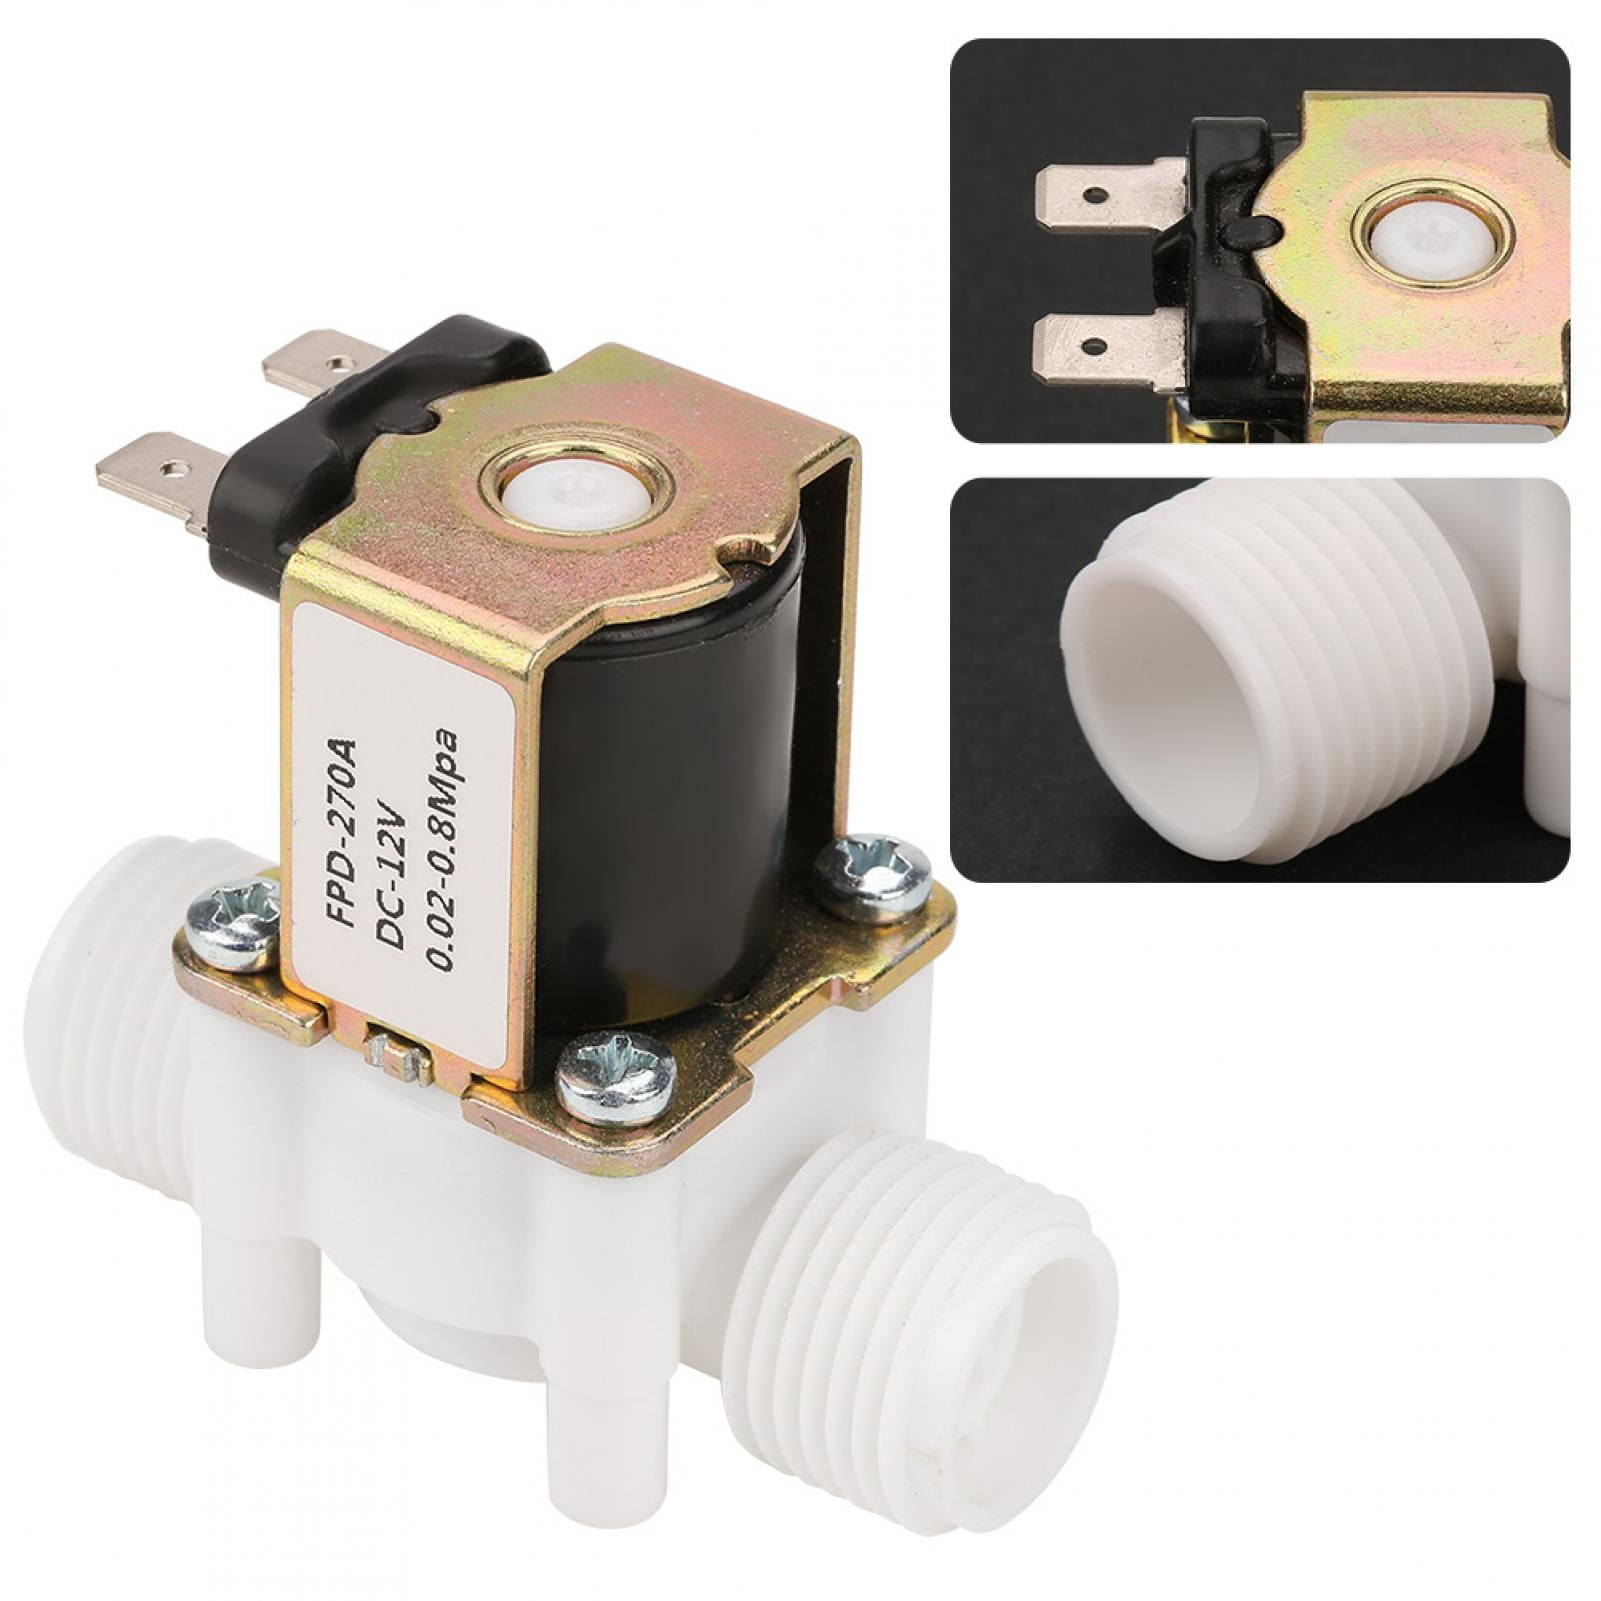 NEW 1/2" Water Control NC 12v dc Solenoid Valve 